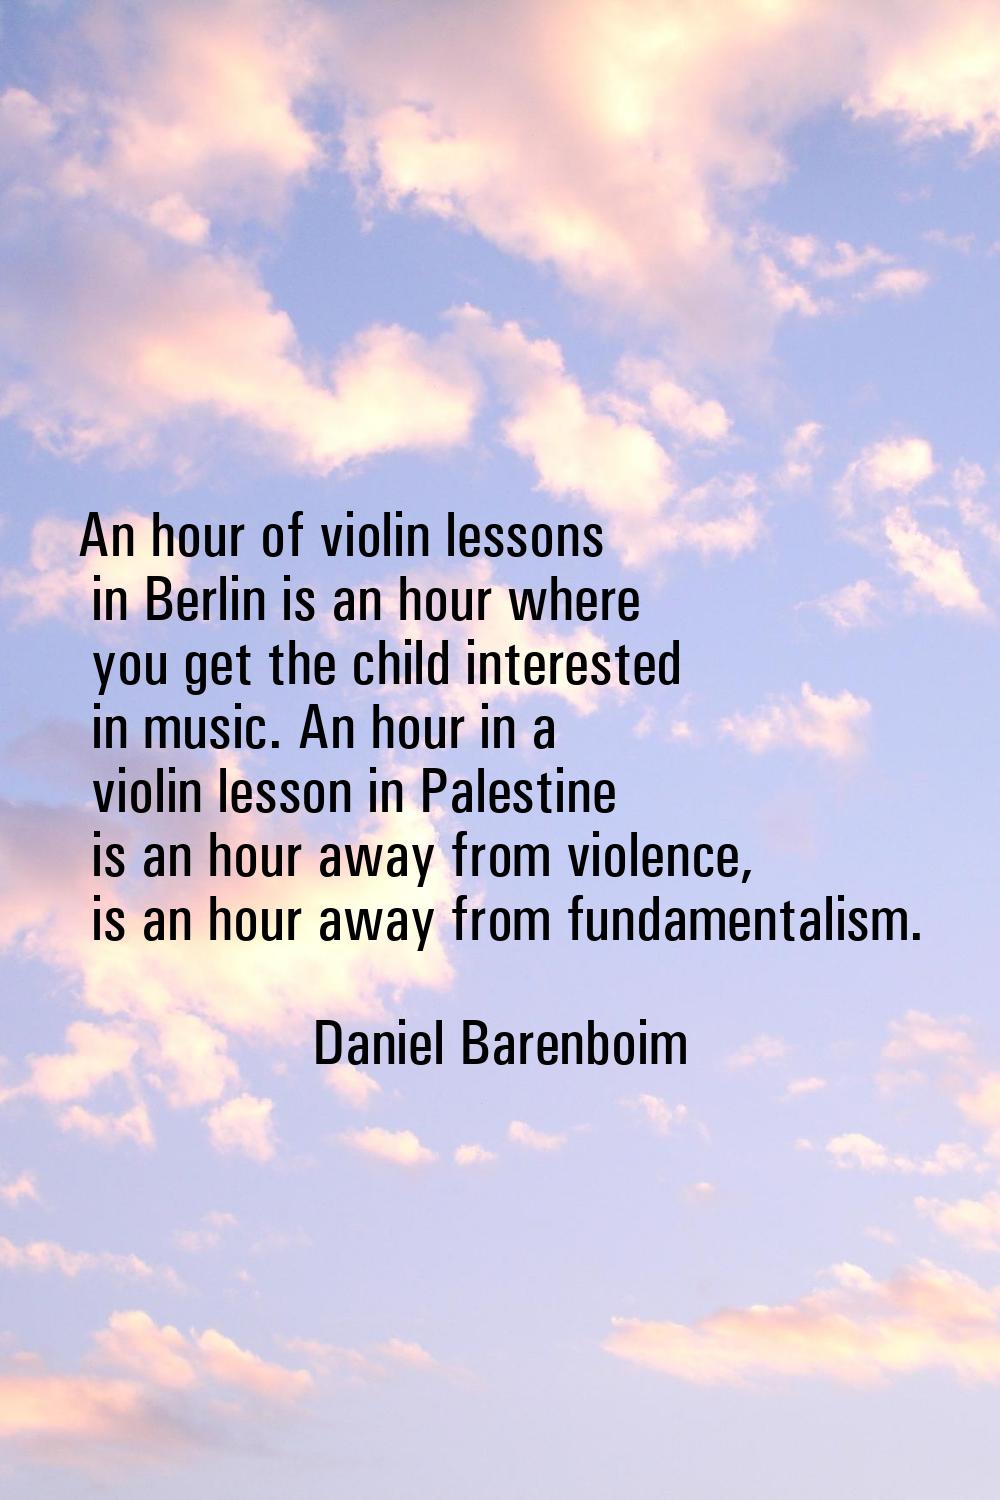 An hour of violin lessons in Berlin is an hour where you get the child interested in music. An hour